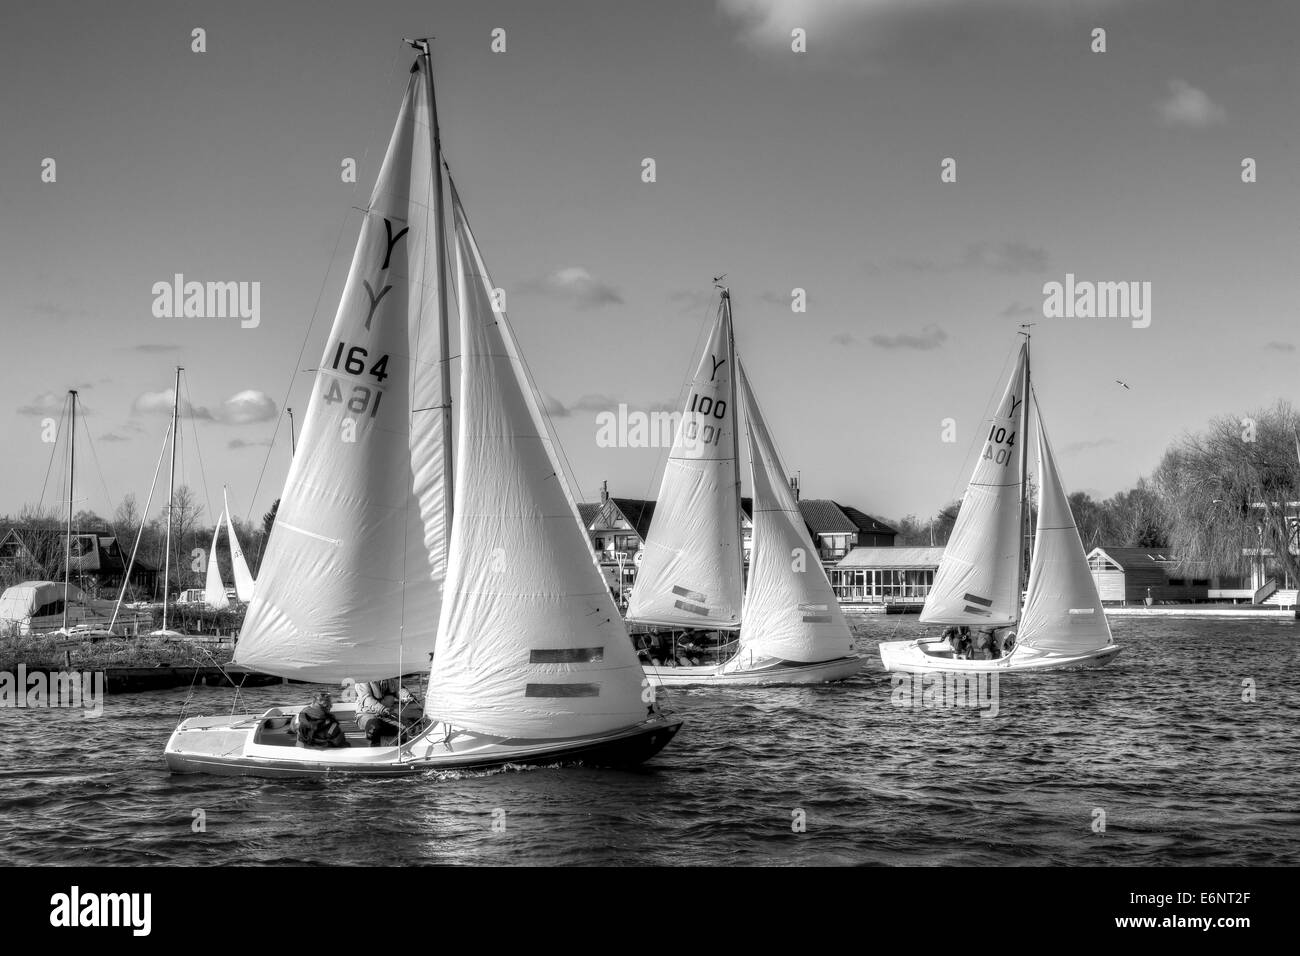 Sailing boats on the water at Horning , Norfolk, UK. Stock Photo